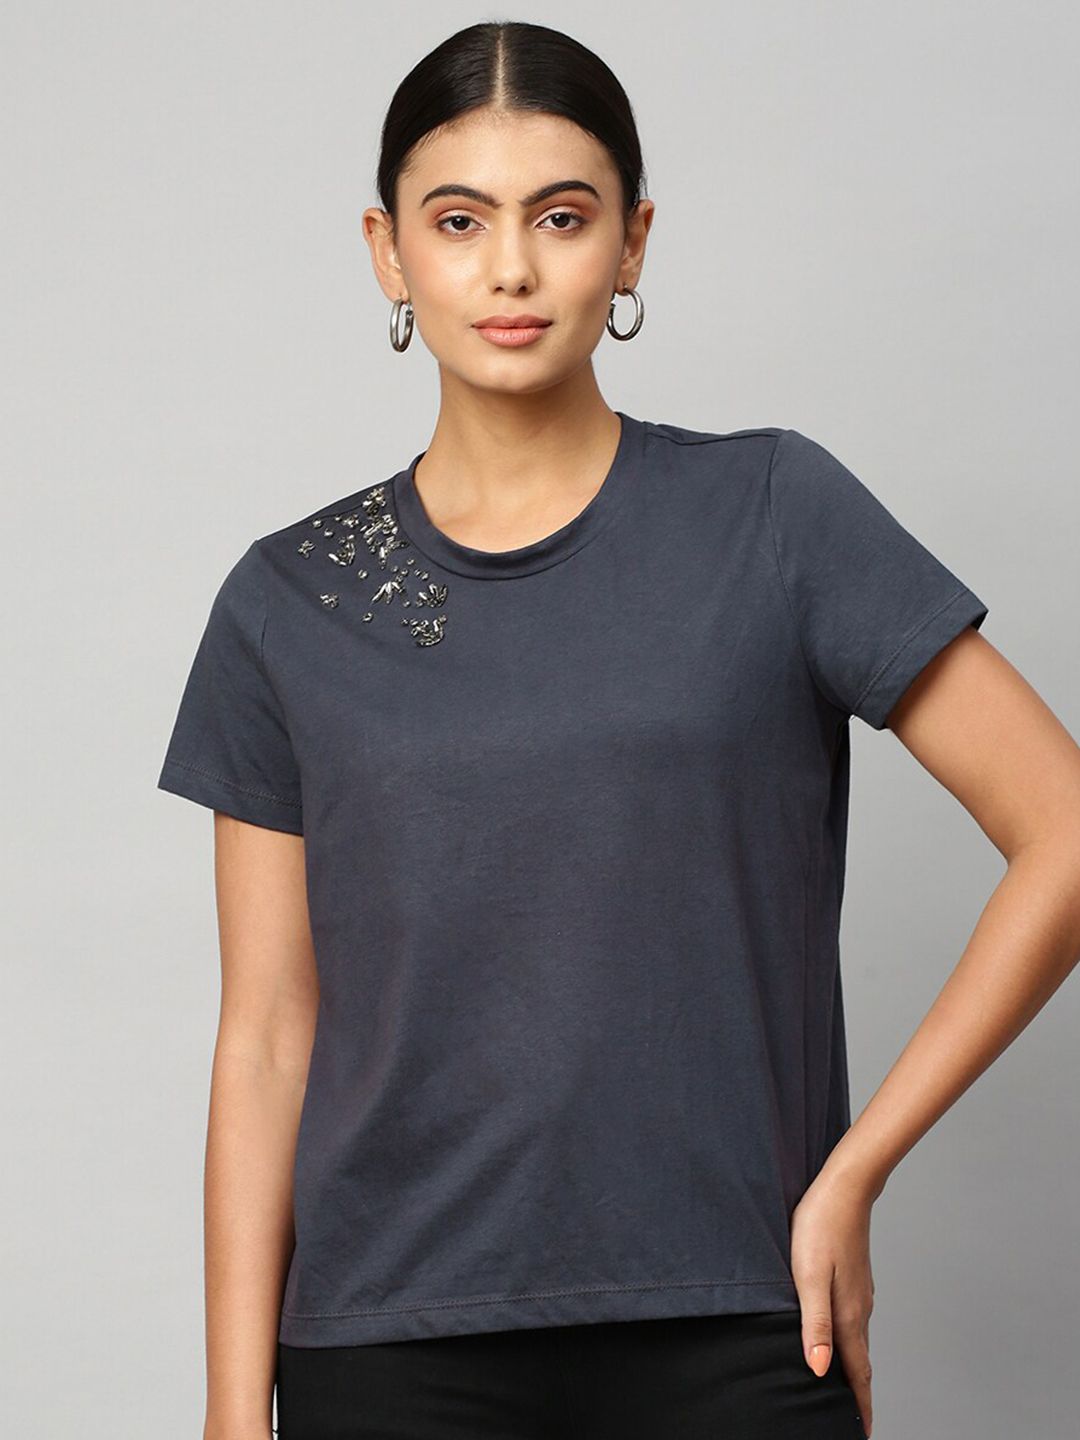 Chemistry Charcoal Grey Embellished Top Price in India